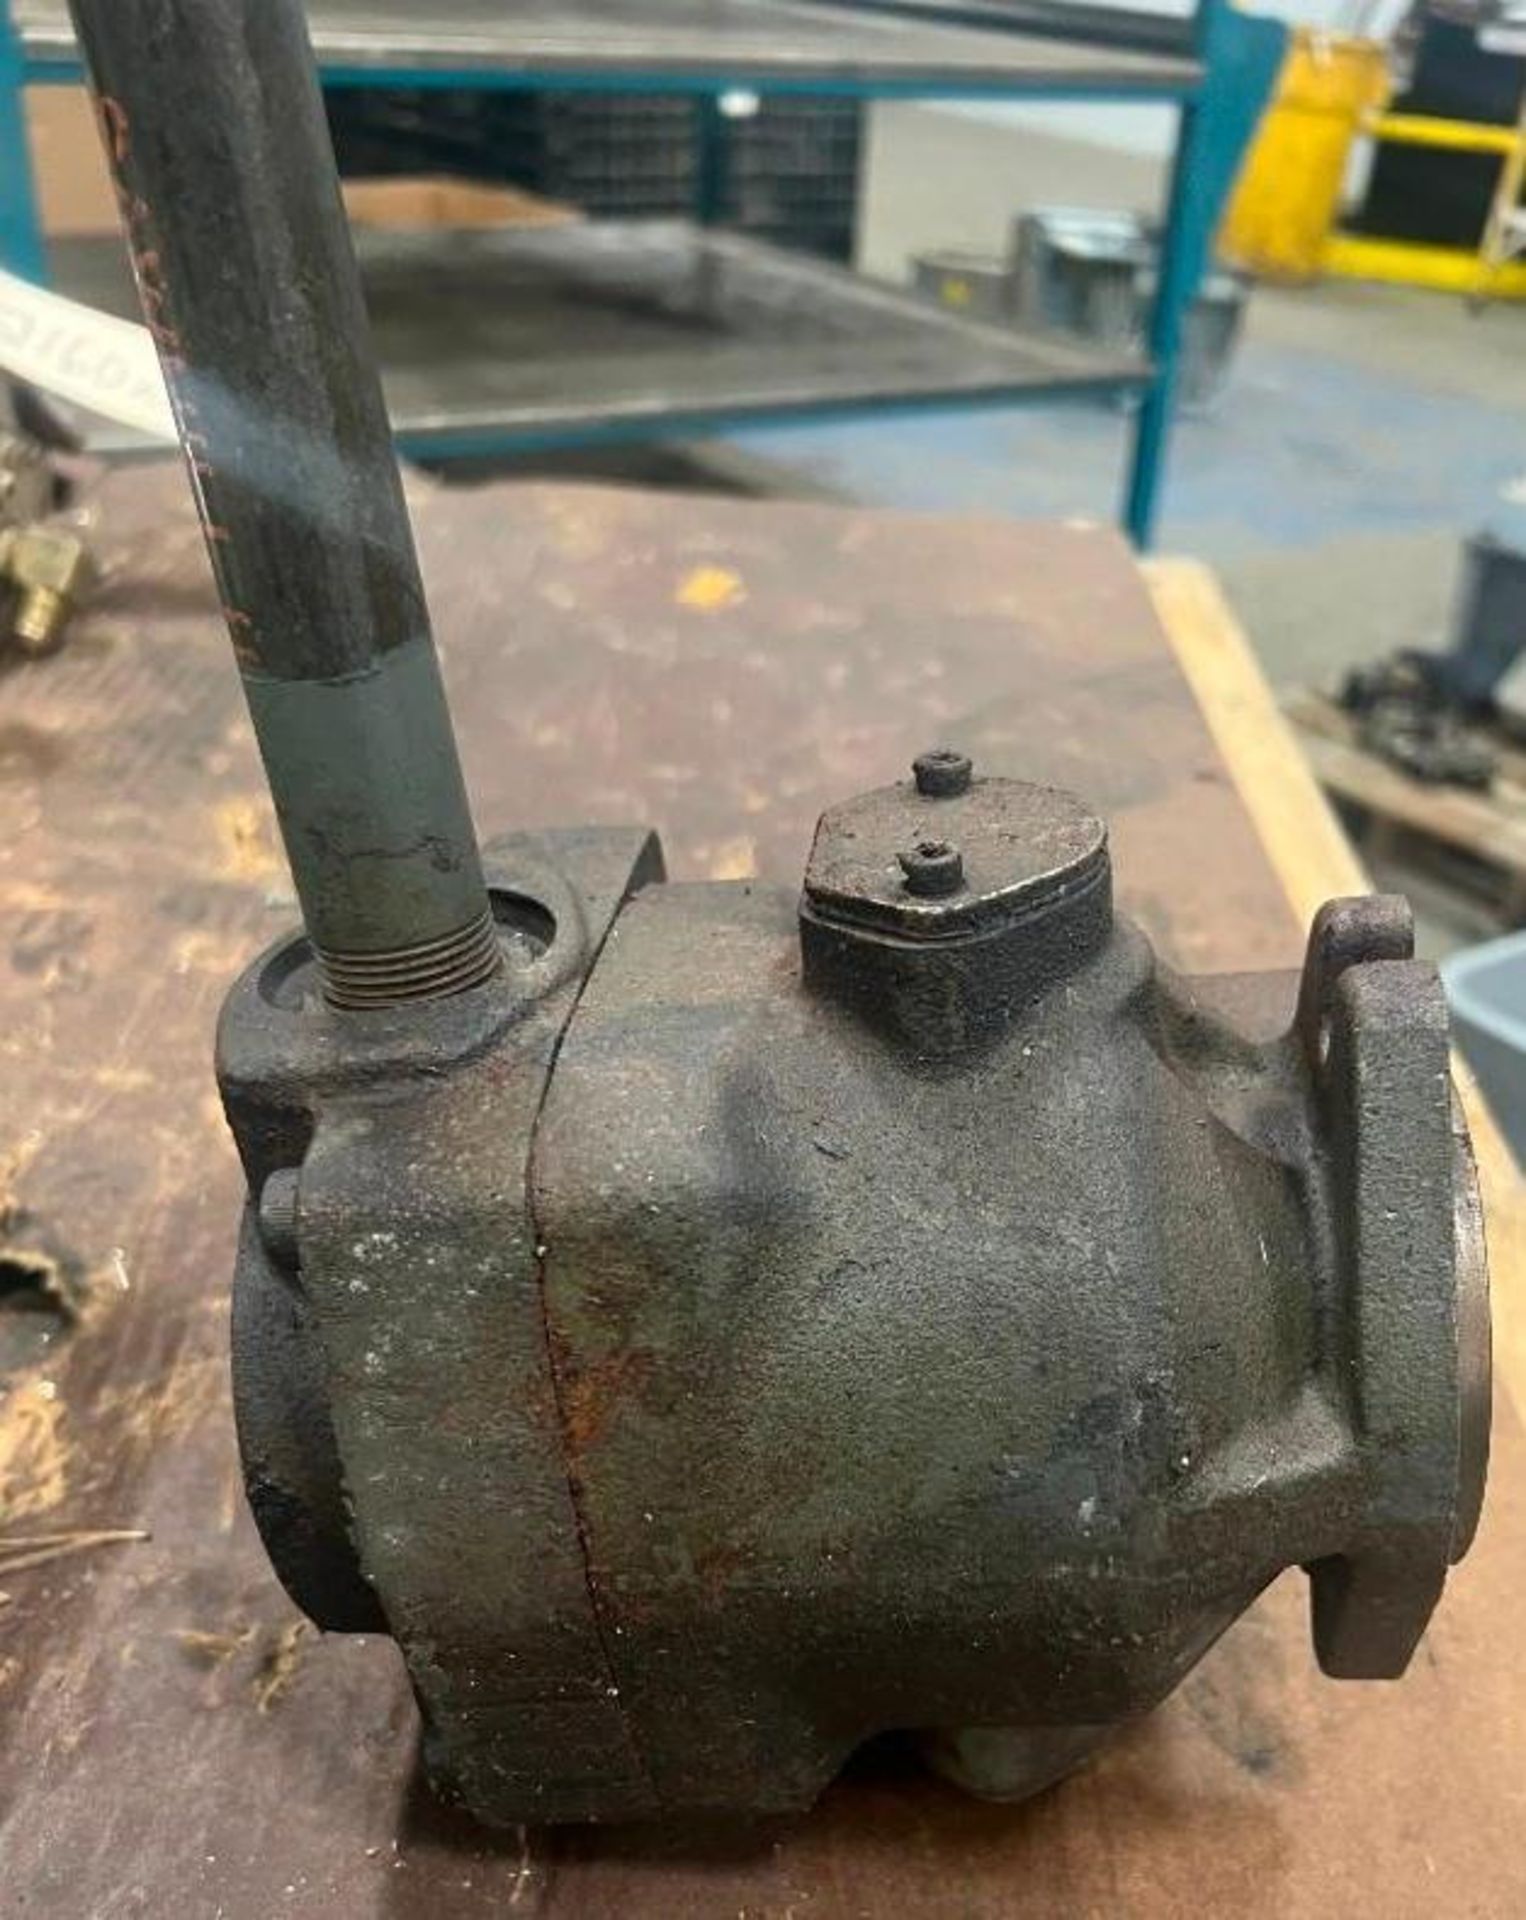 Hydraulic Pump - Tag is Not Visible